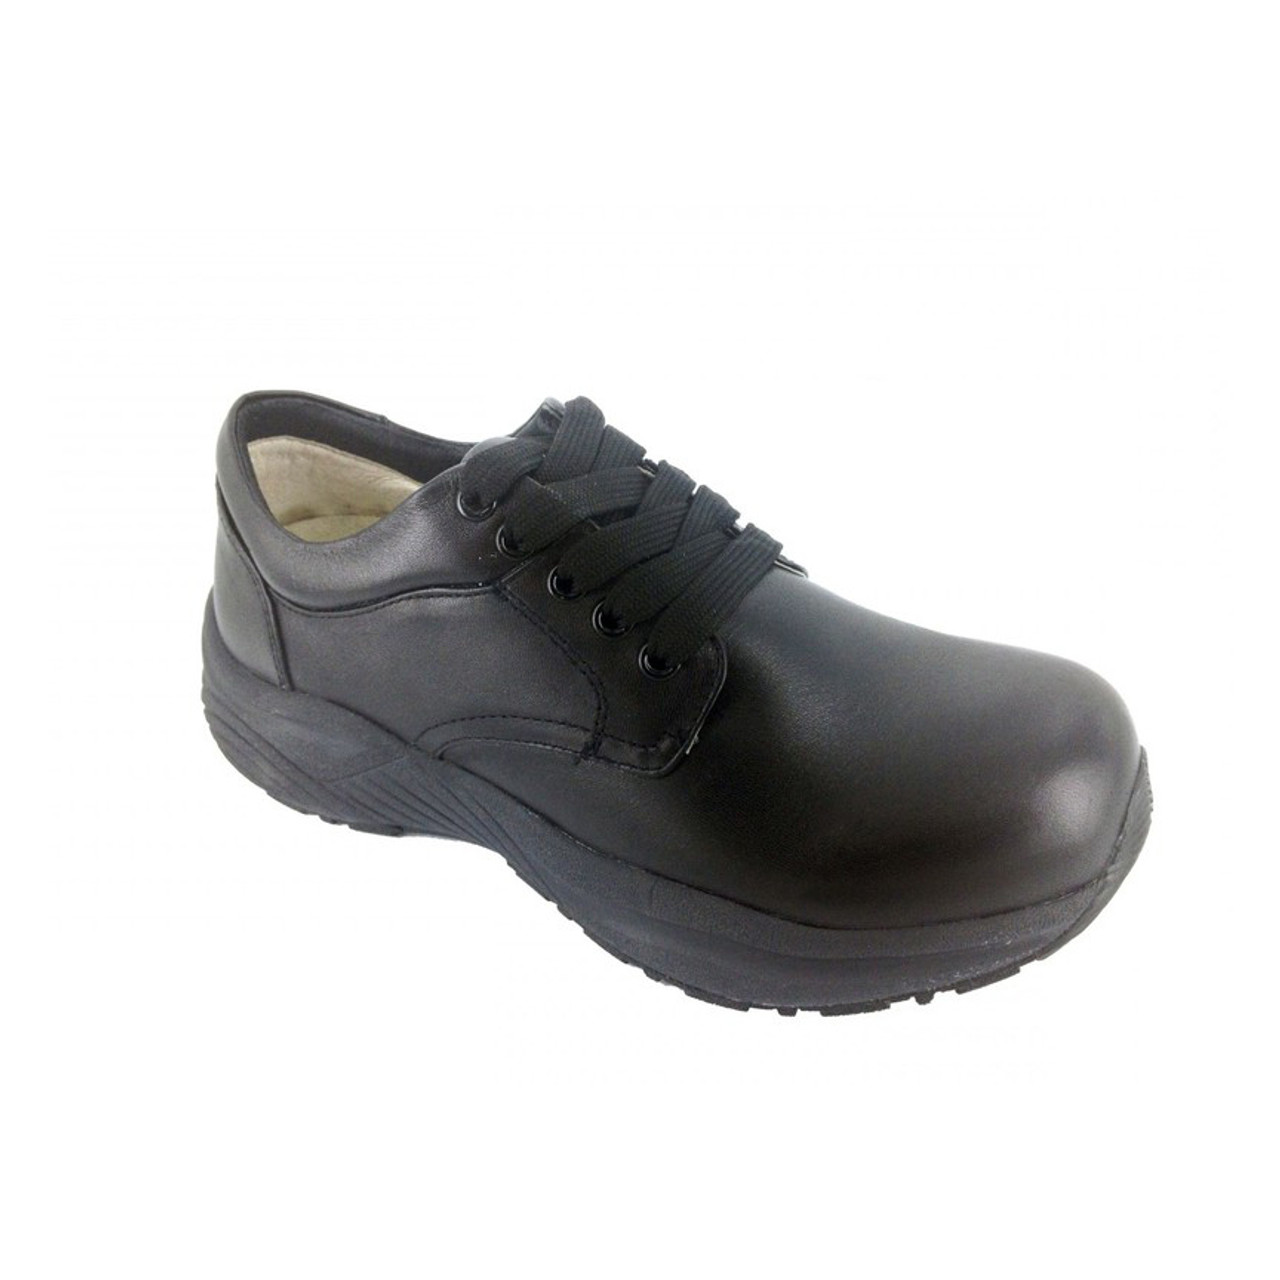 Genext Black Lace Up Orthopedic Shoes For Work For Men